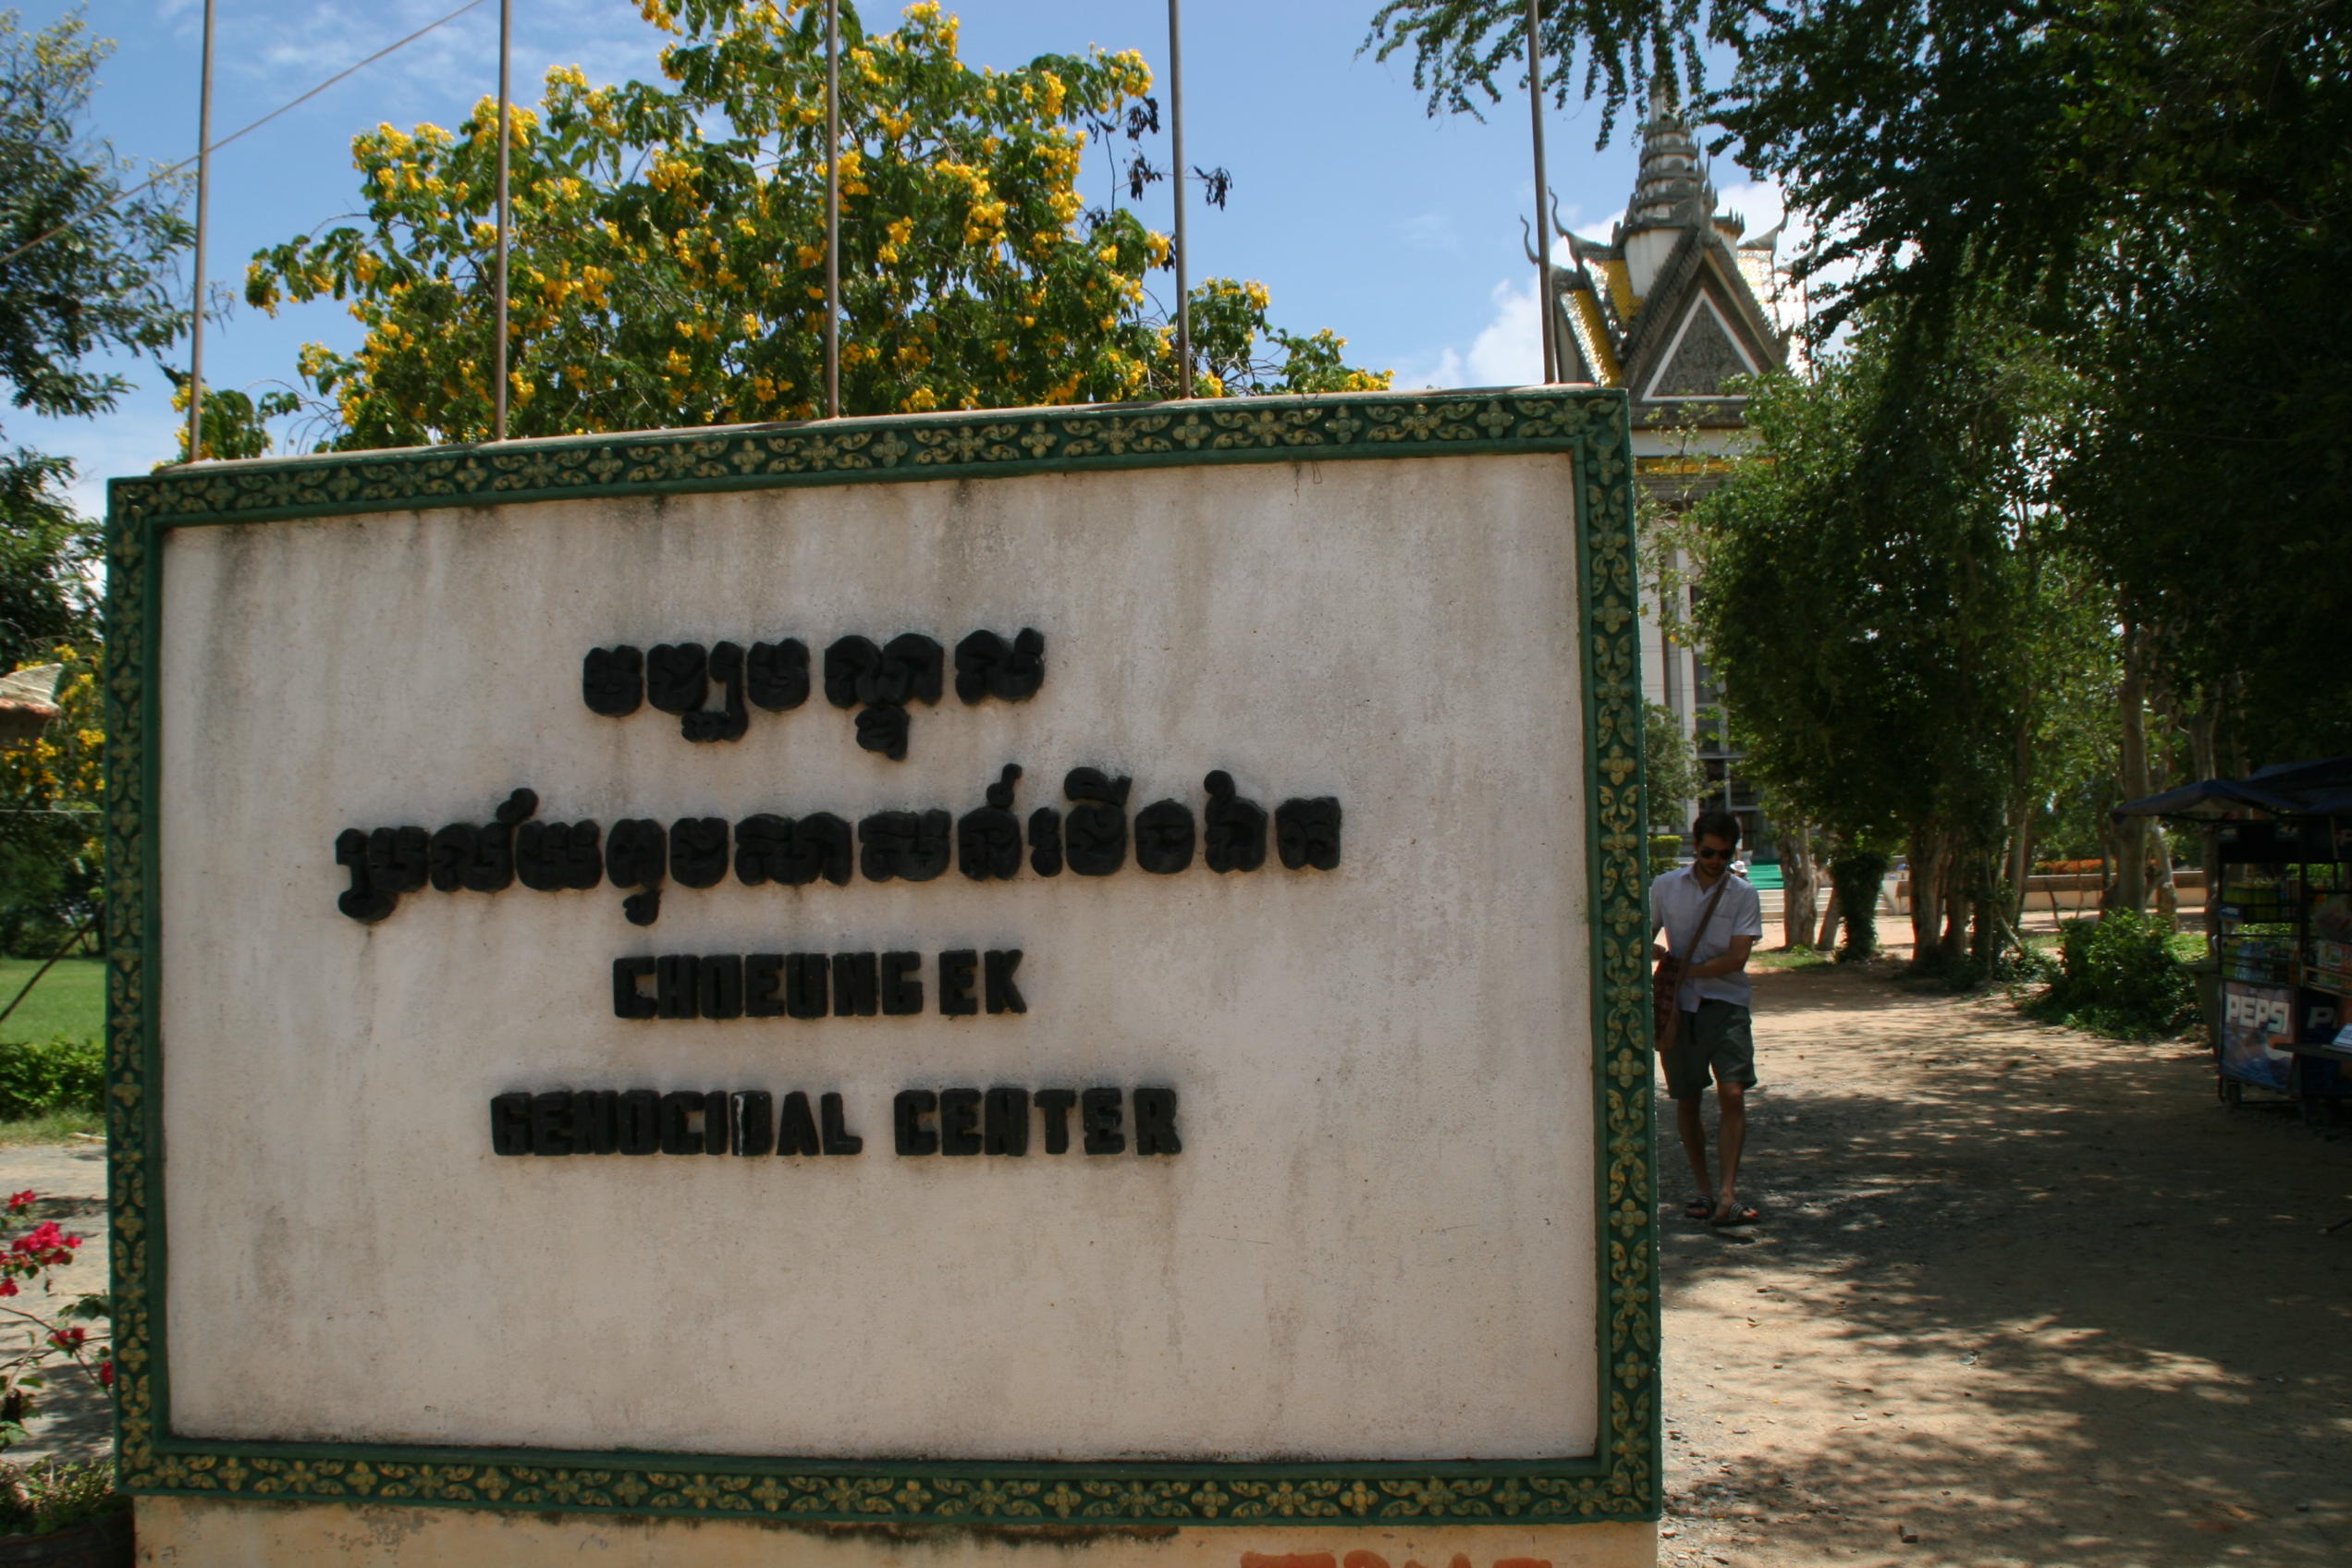 Choeung Ek is the best-known of the sites known as The Killing Fields